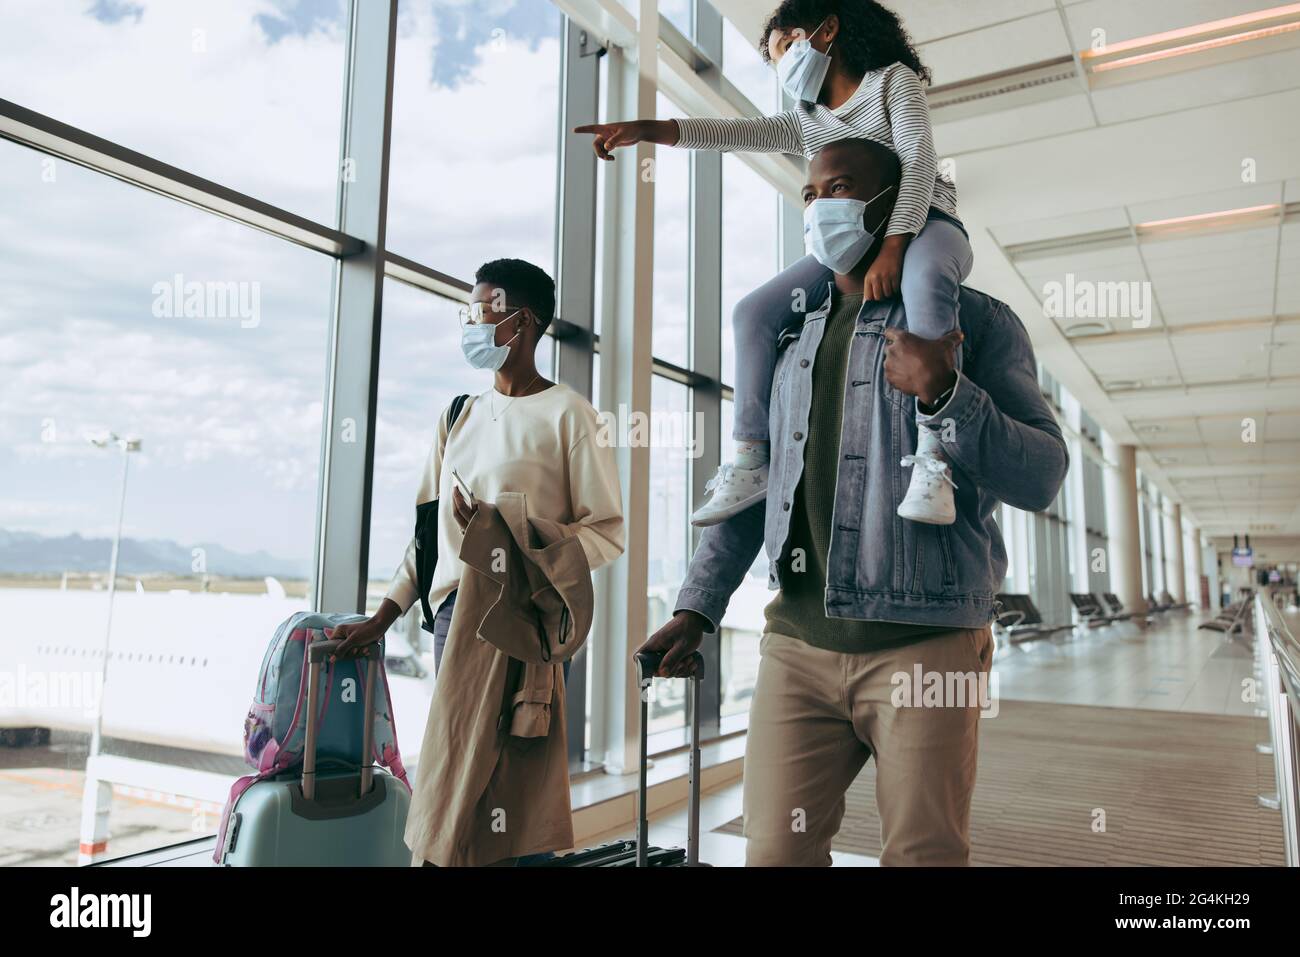 Kid girl on shoulder of man showing airplanes while walking at airport. Family wearing face masks going for boarding airplane. Stock Photo